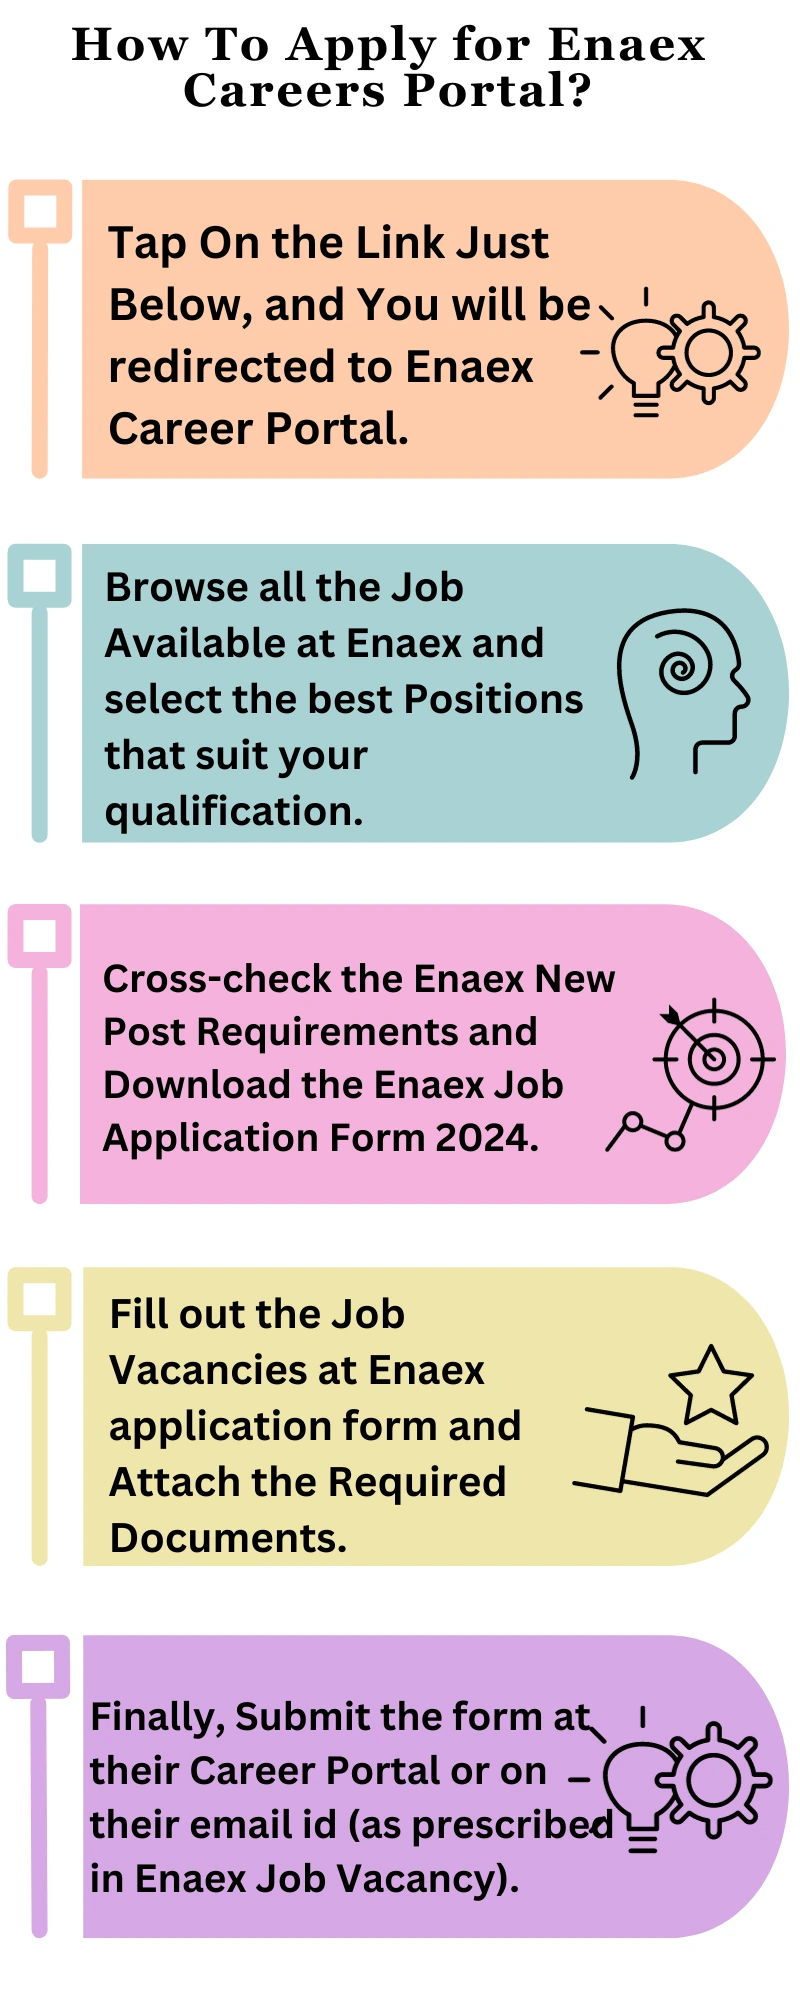 How To Apply for Enaex Careers Portal?